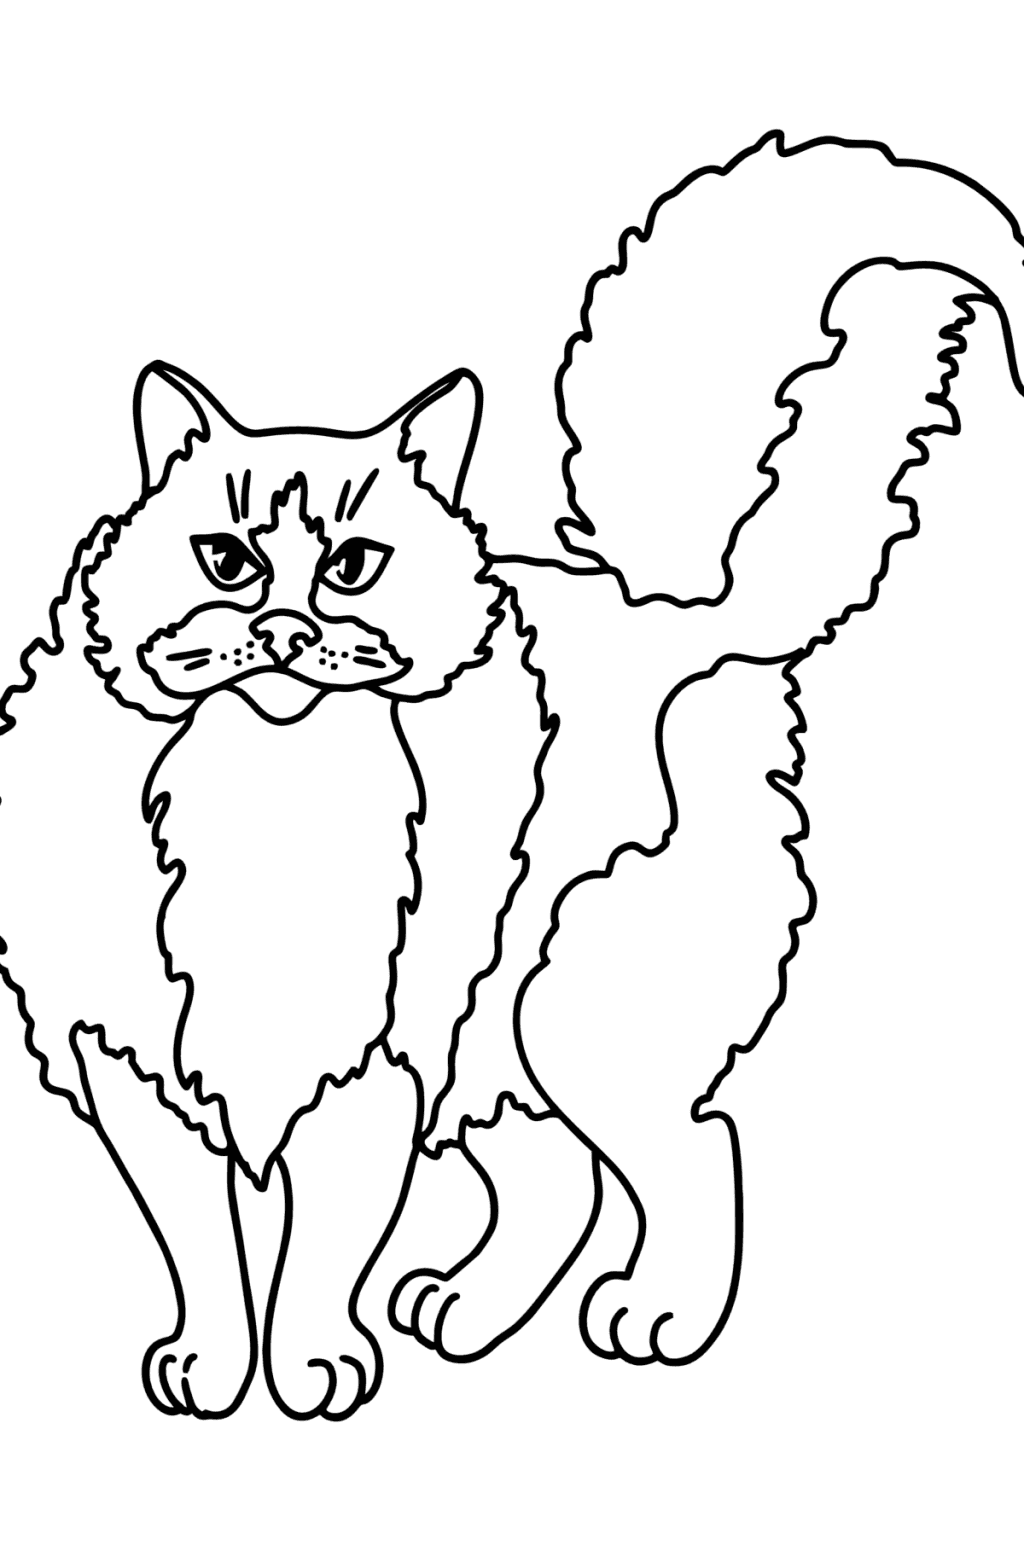 Ragdoll Cat coloring page ♥ Online and Print for Free!